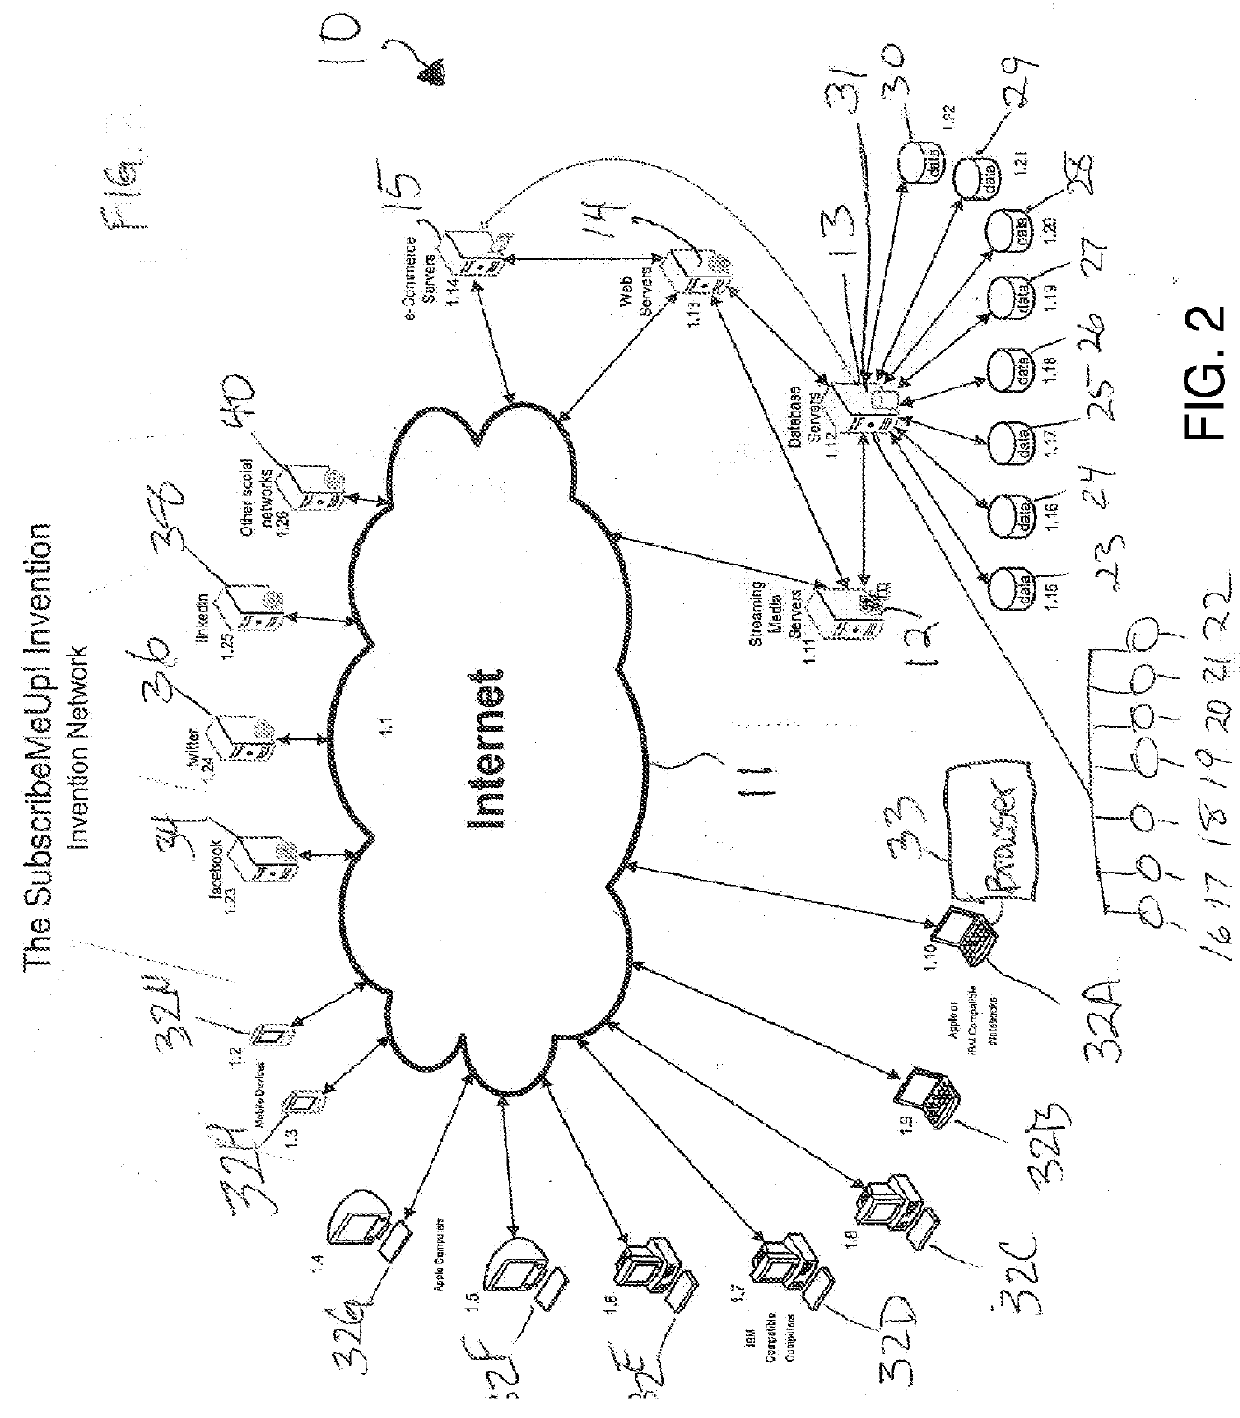 Social-referral network methods and apparatus